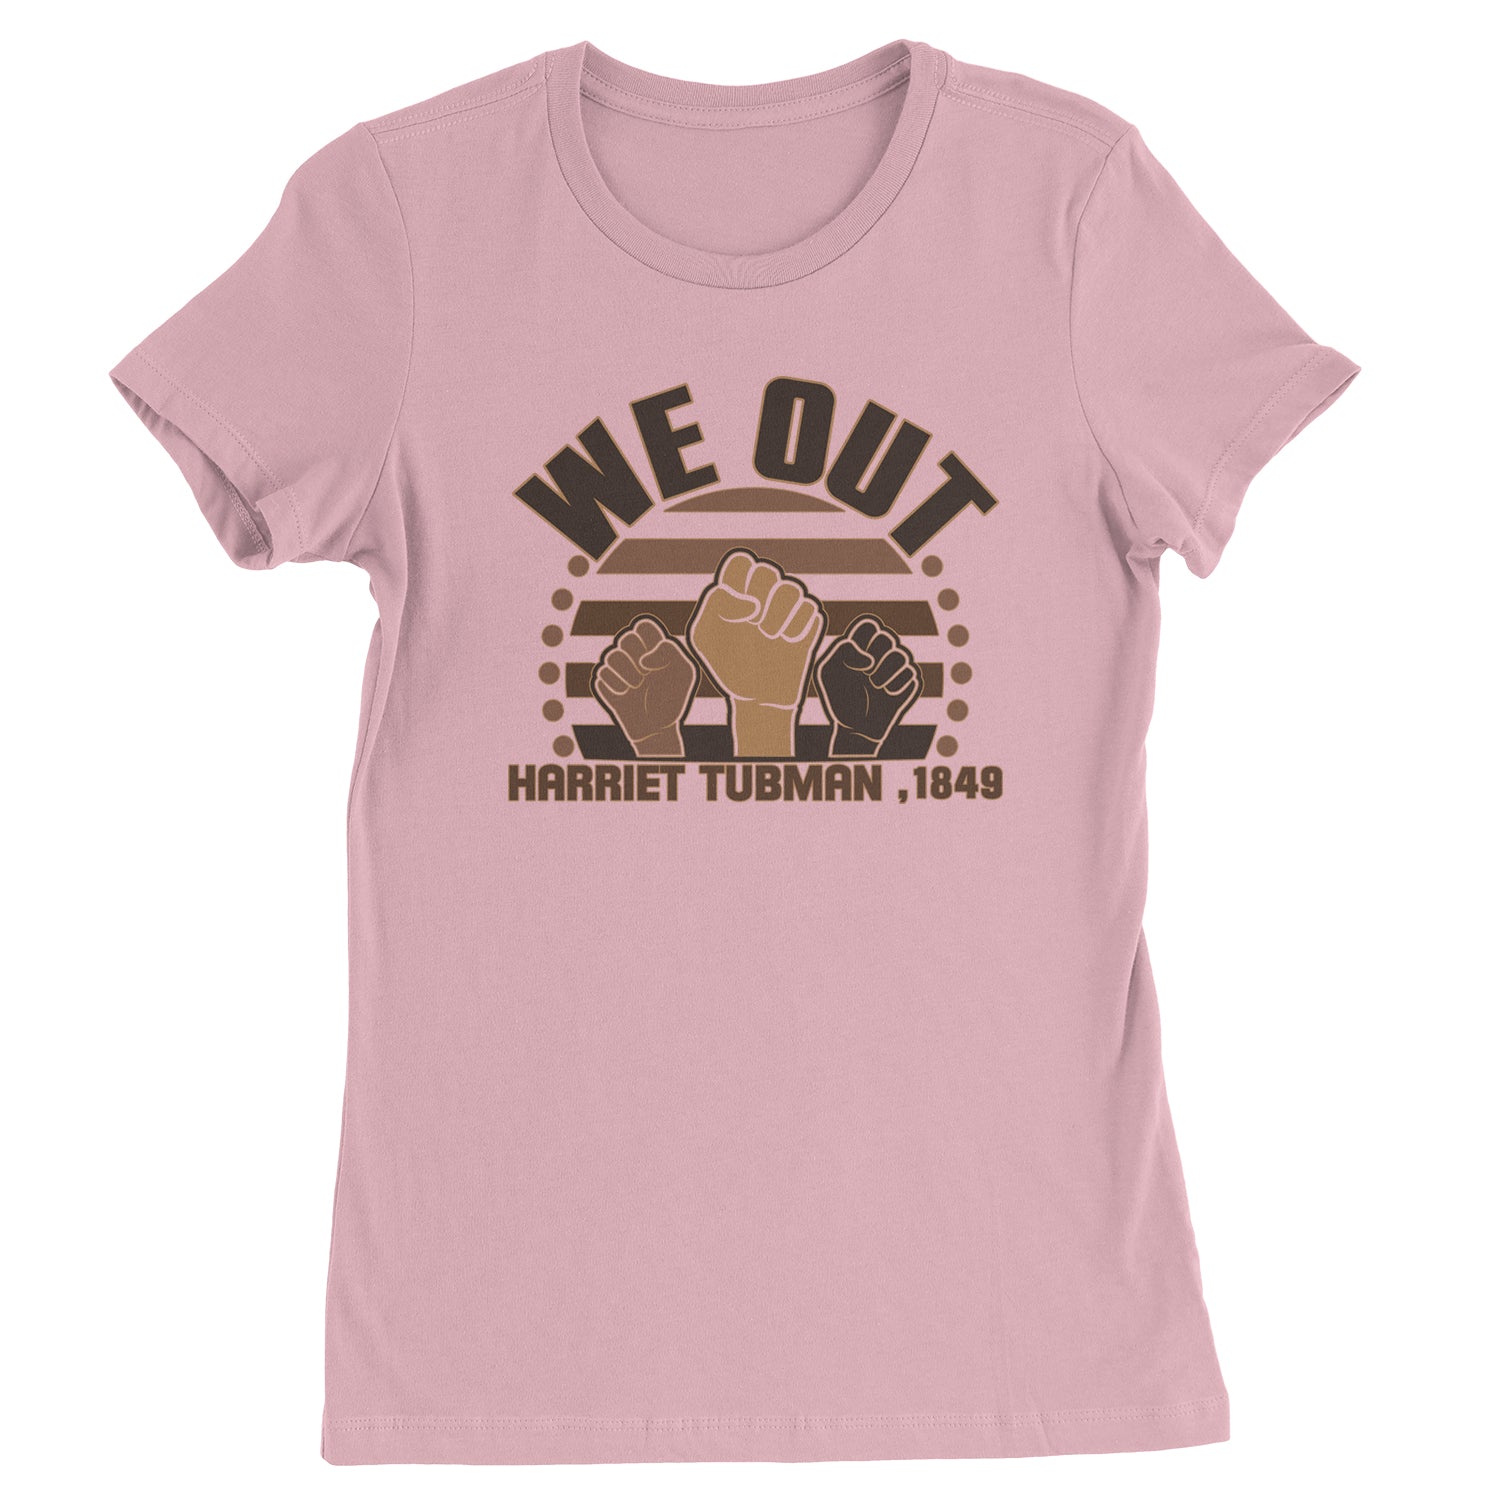 We Out Harriet Tubman Raised Fists BLM Womens T-shirt african, american, black, blm, harriet, harriett, lives, matter, out, shirt, tubman, we by Expression Tees